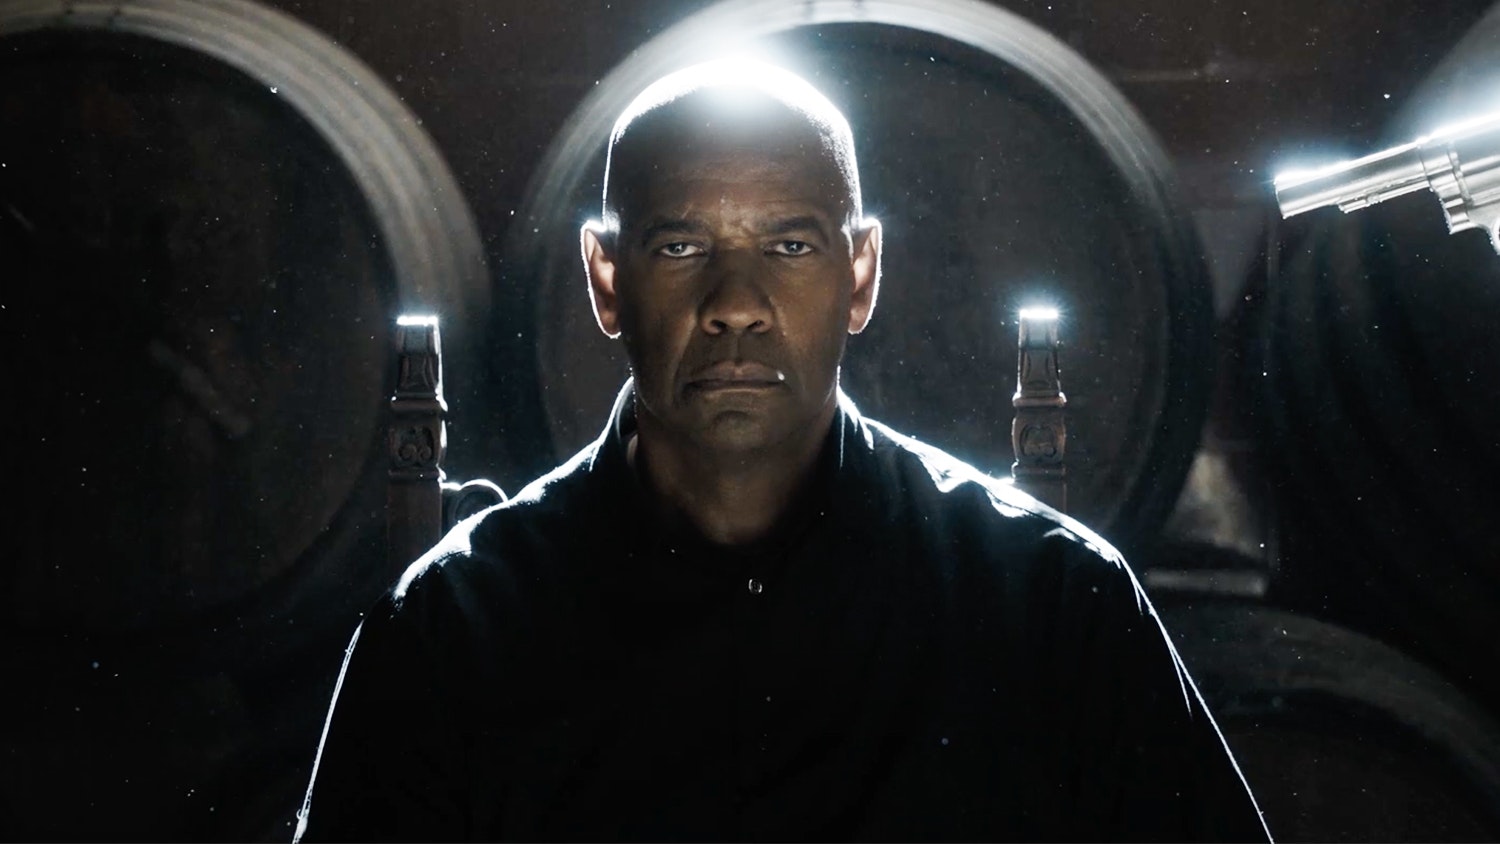 https://images.bauerhosting.com/empire/2023/04/the-equalizer-3-trailer.jpg?ar=16%3A9&fit=crop&crop=top&auto=format&w=undefined&q=80